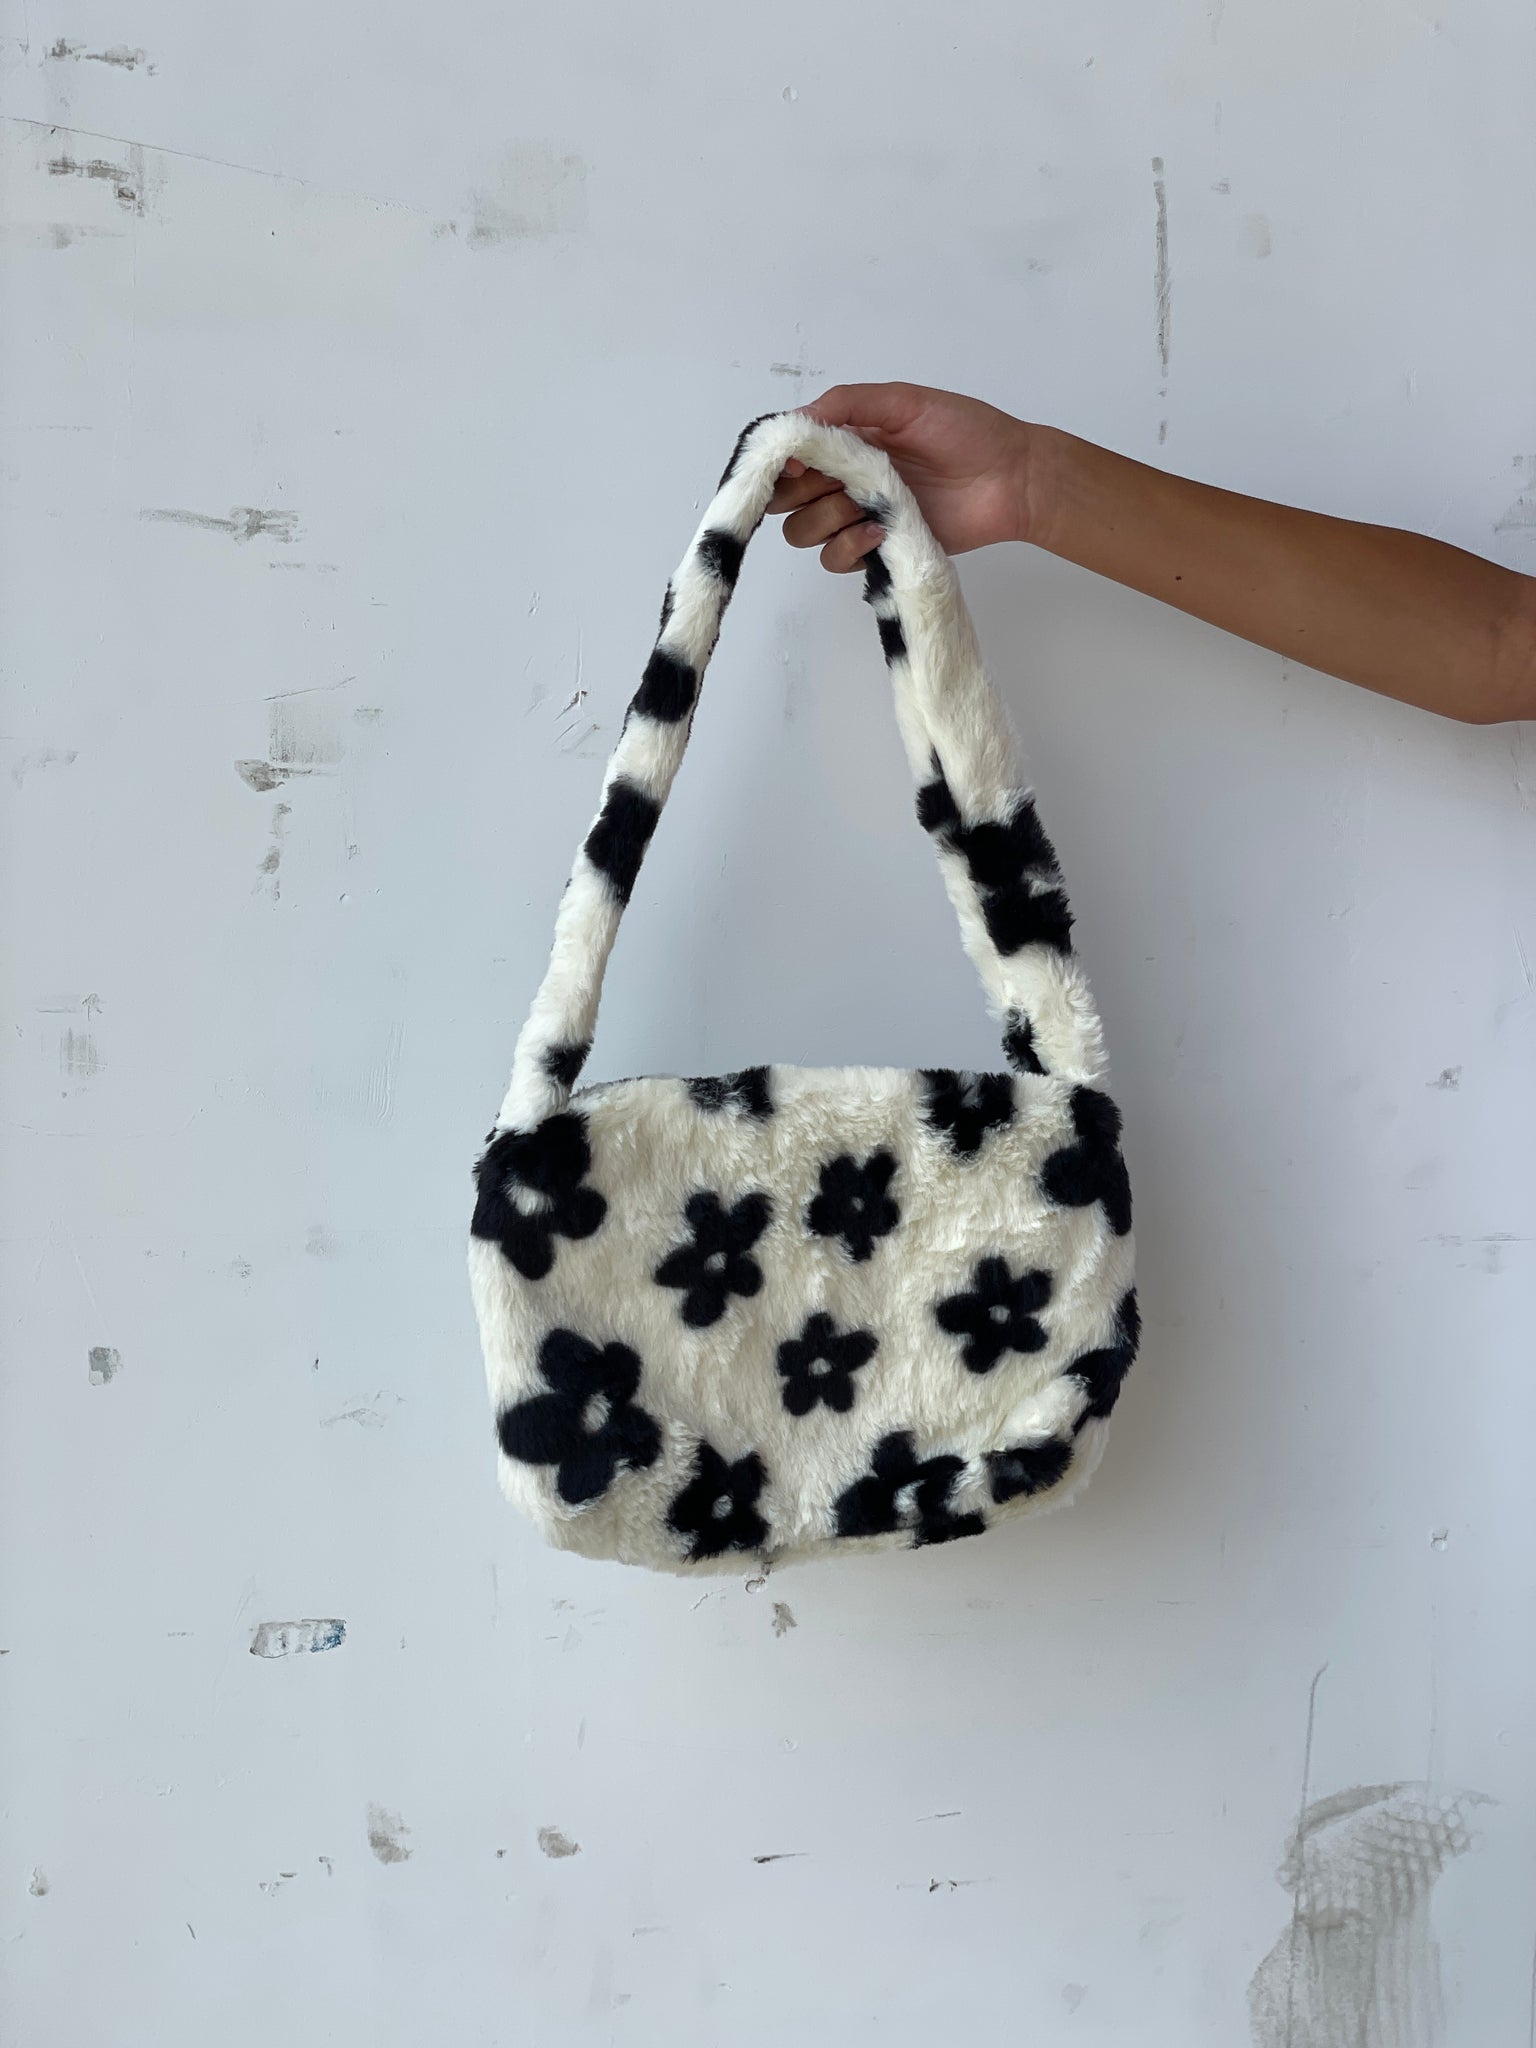 The Fuzzy Flower Tote